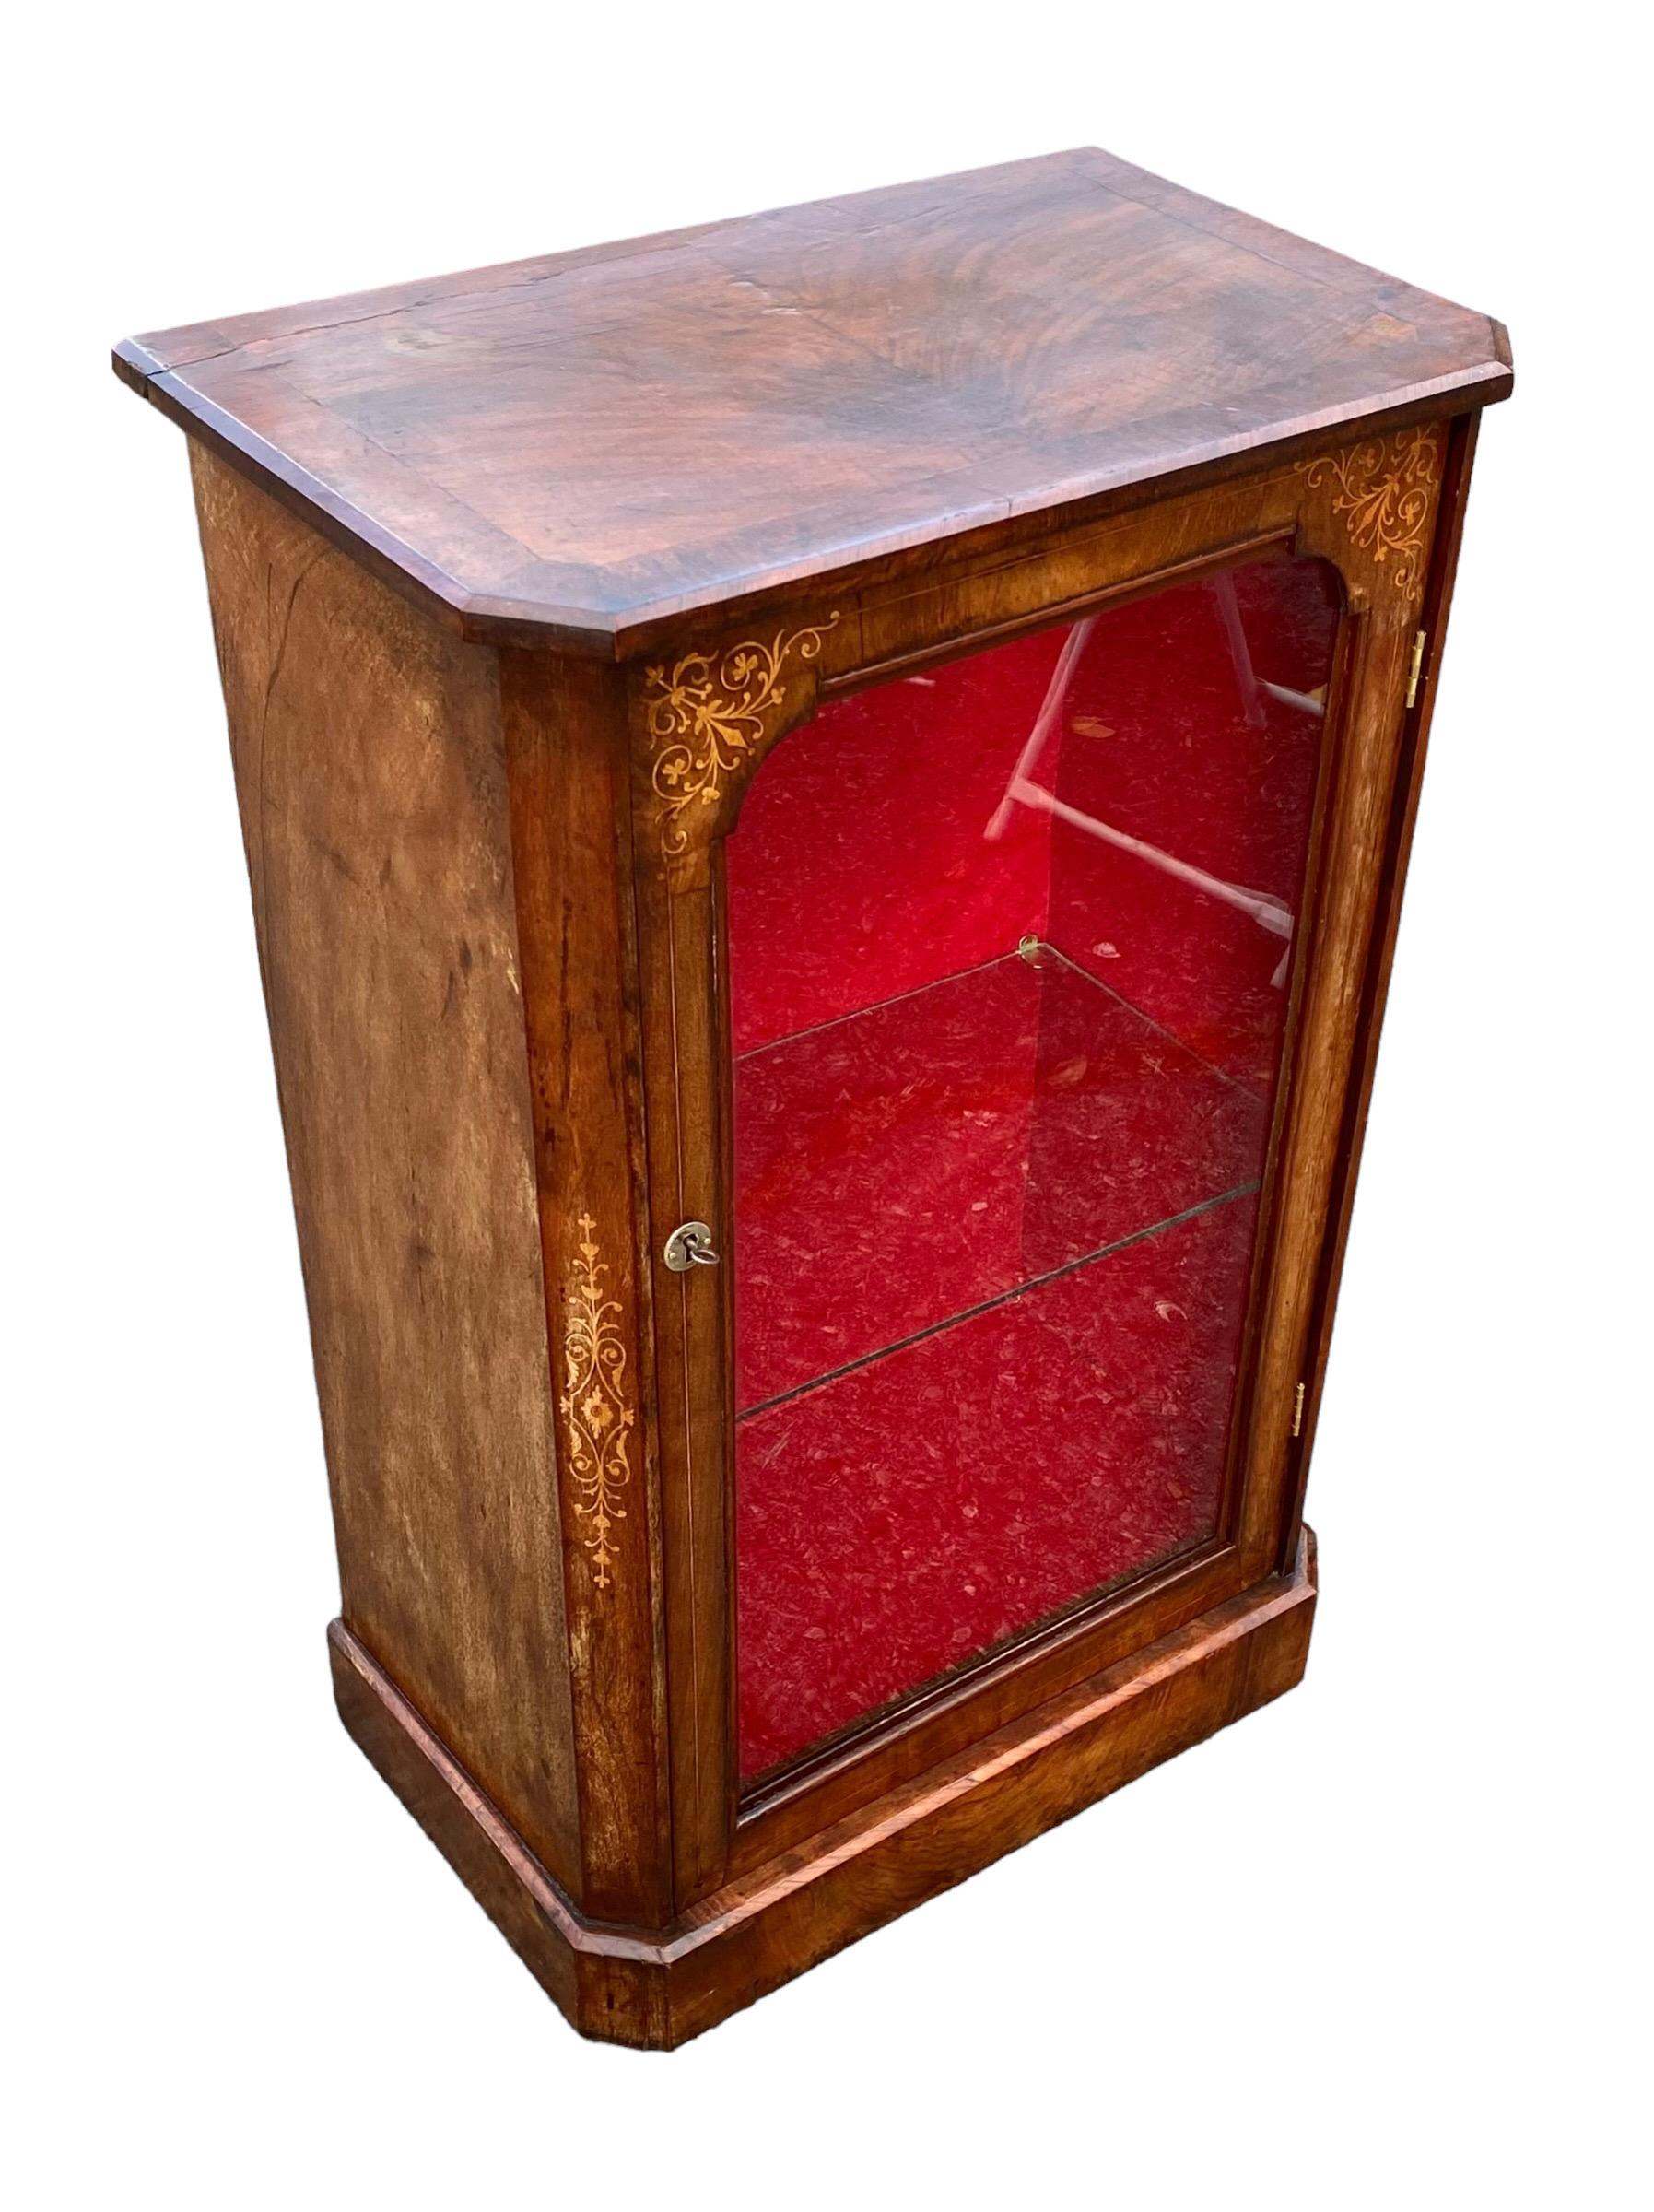 Circa 1910 antique Edwardian, marquetry inlaid, figured walnut pier cabinet. The rectangular top in figured walnut, with moulded edges above a marquetry inlaid frieze with exotic woods. The glazed door with intricate marquetry inlay and satinwood